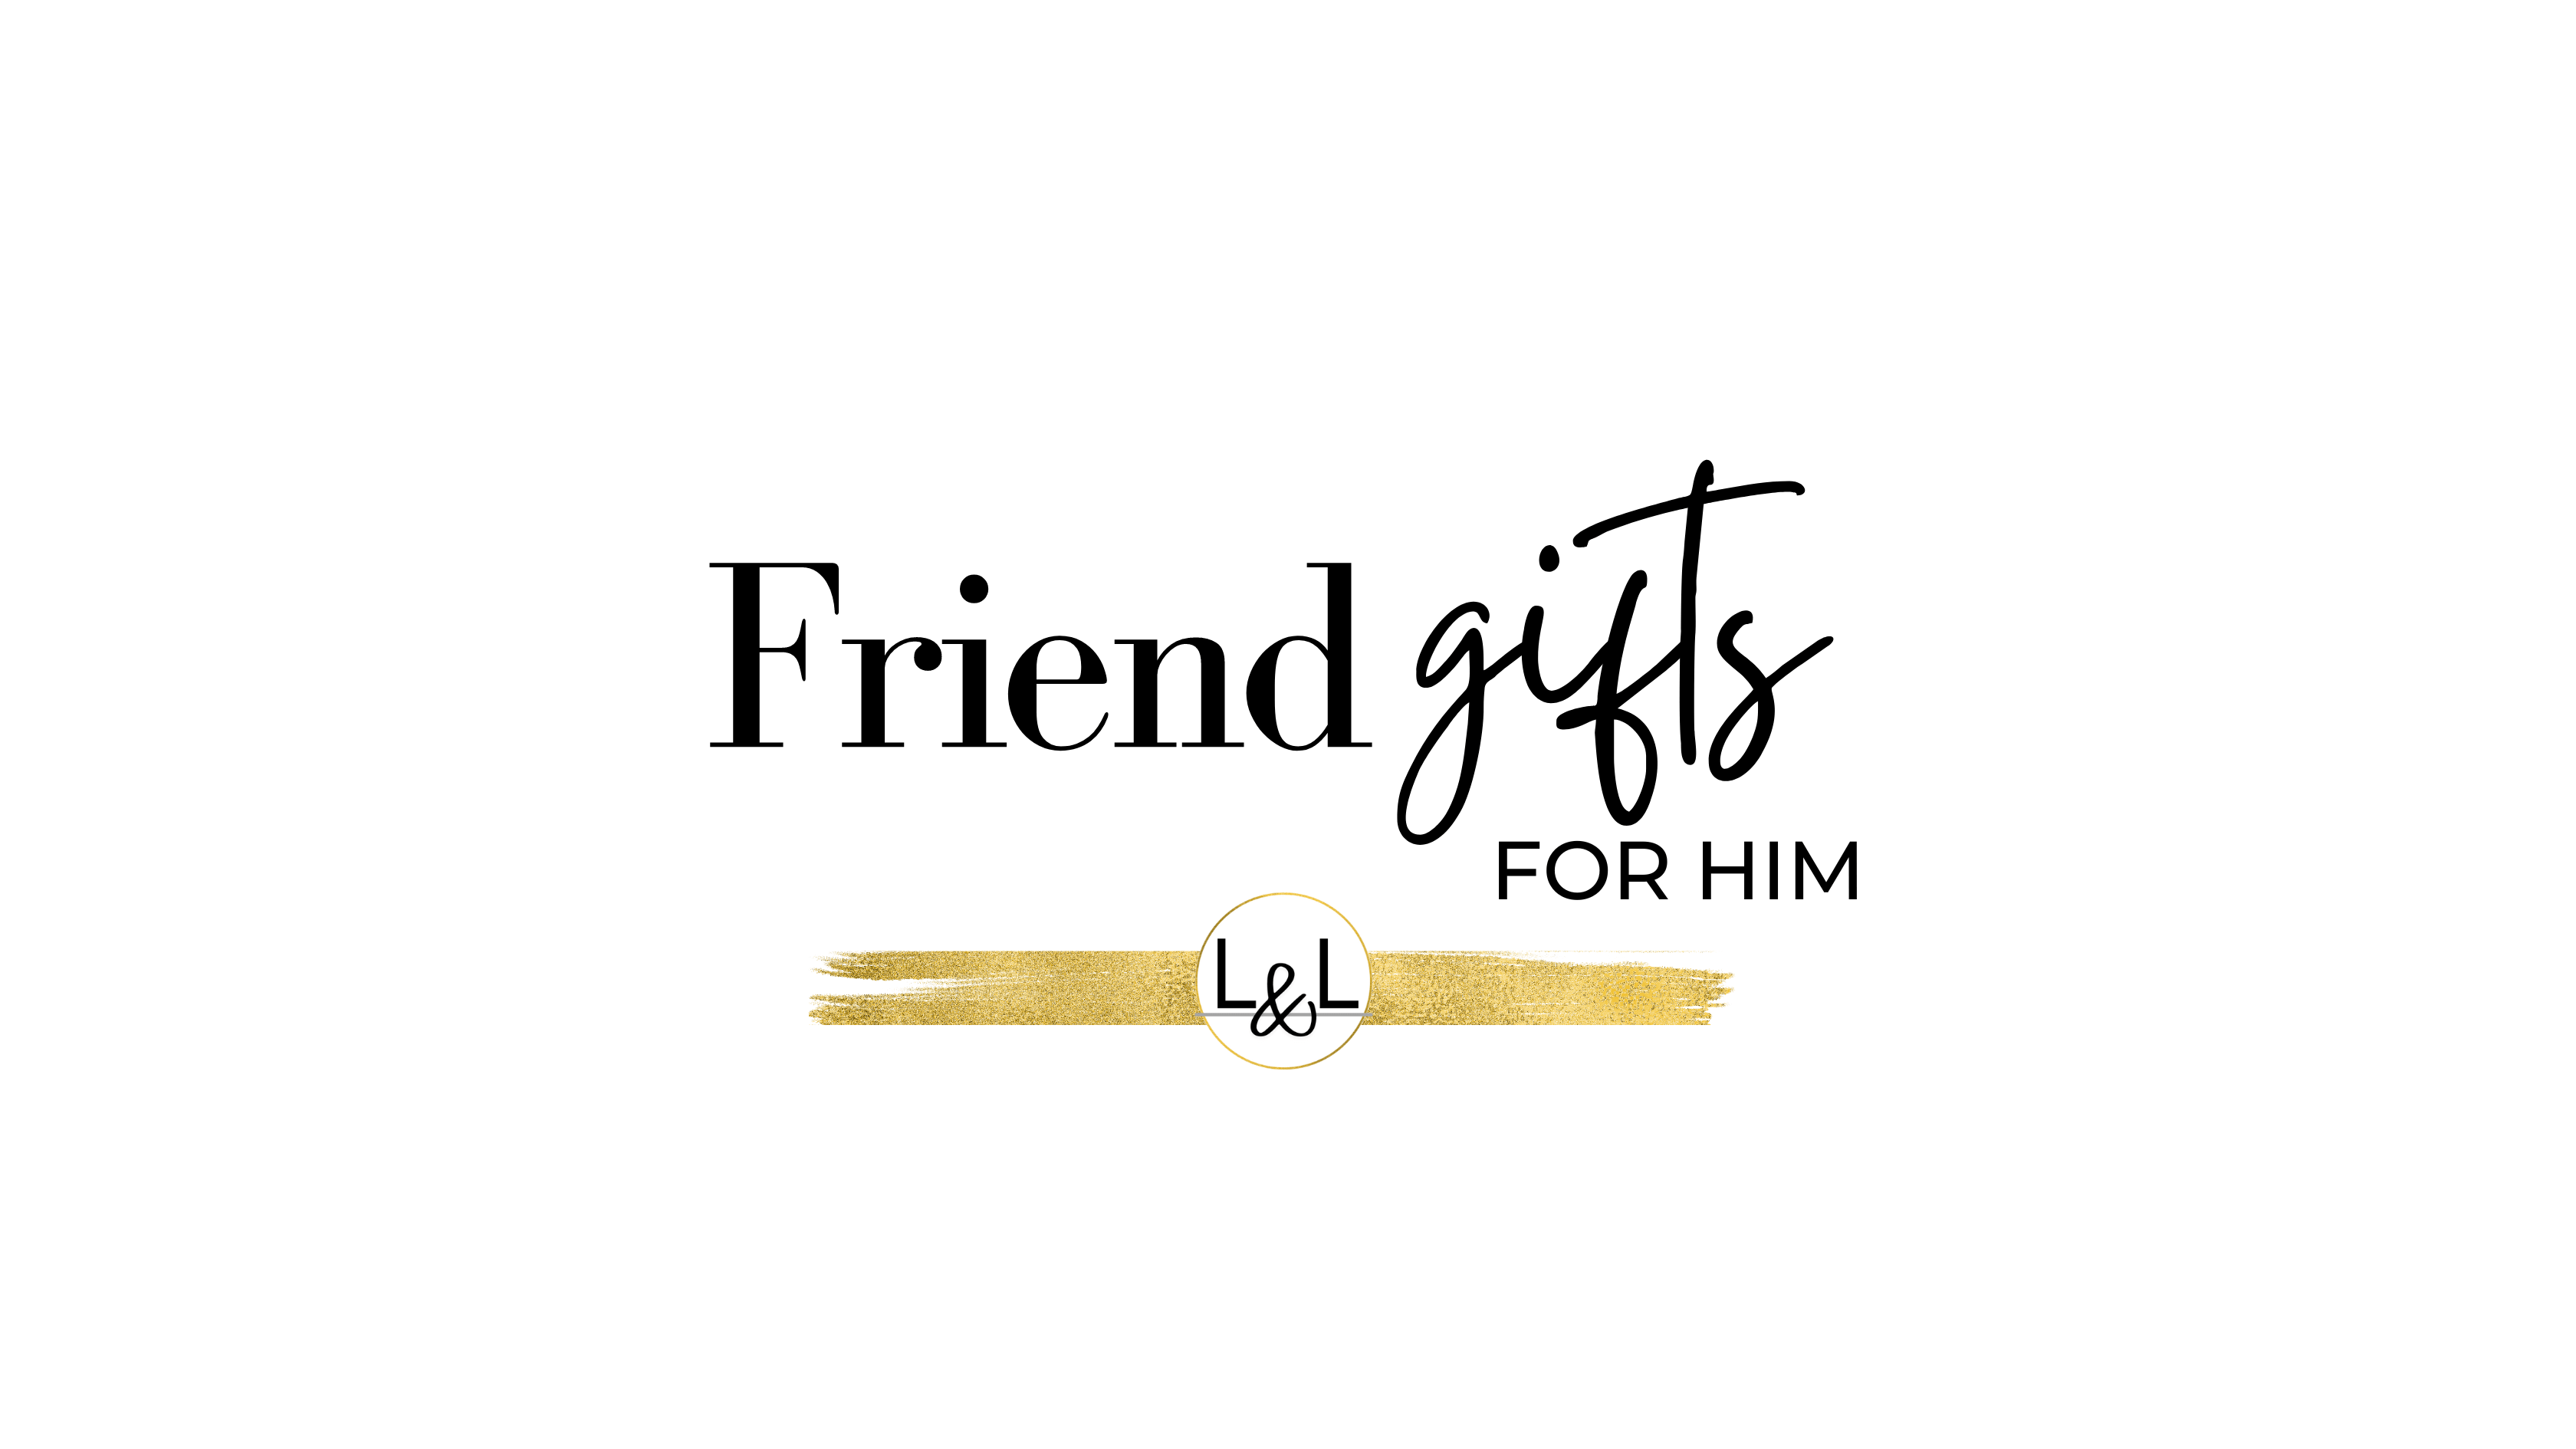 Thoughtful Gift For Male Friend Best Guy Friend Friend Is A Boy Bro Brother From Another Mother Birthday Gift Christmas Present